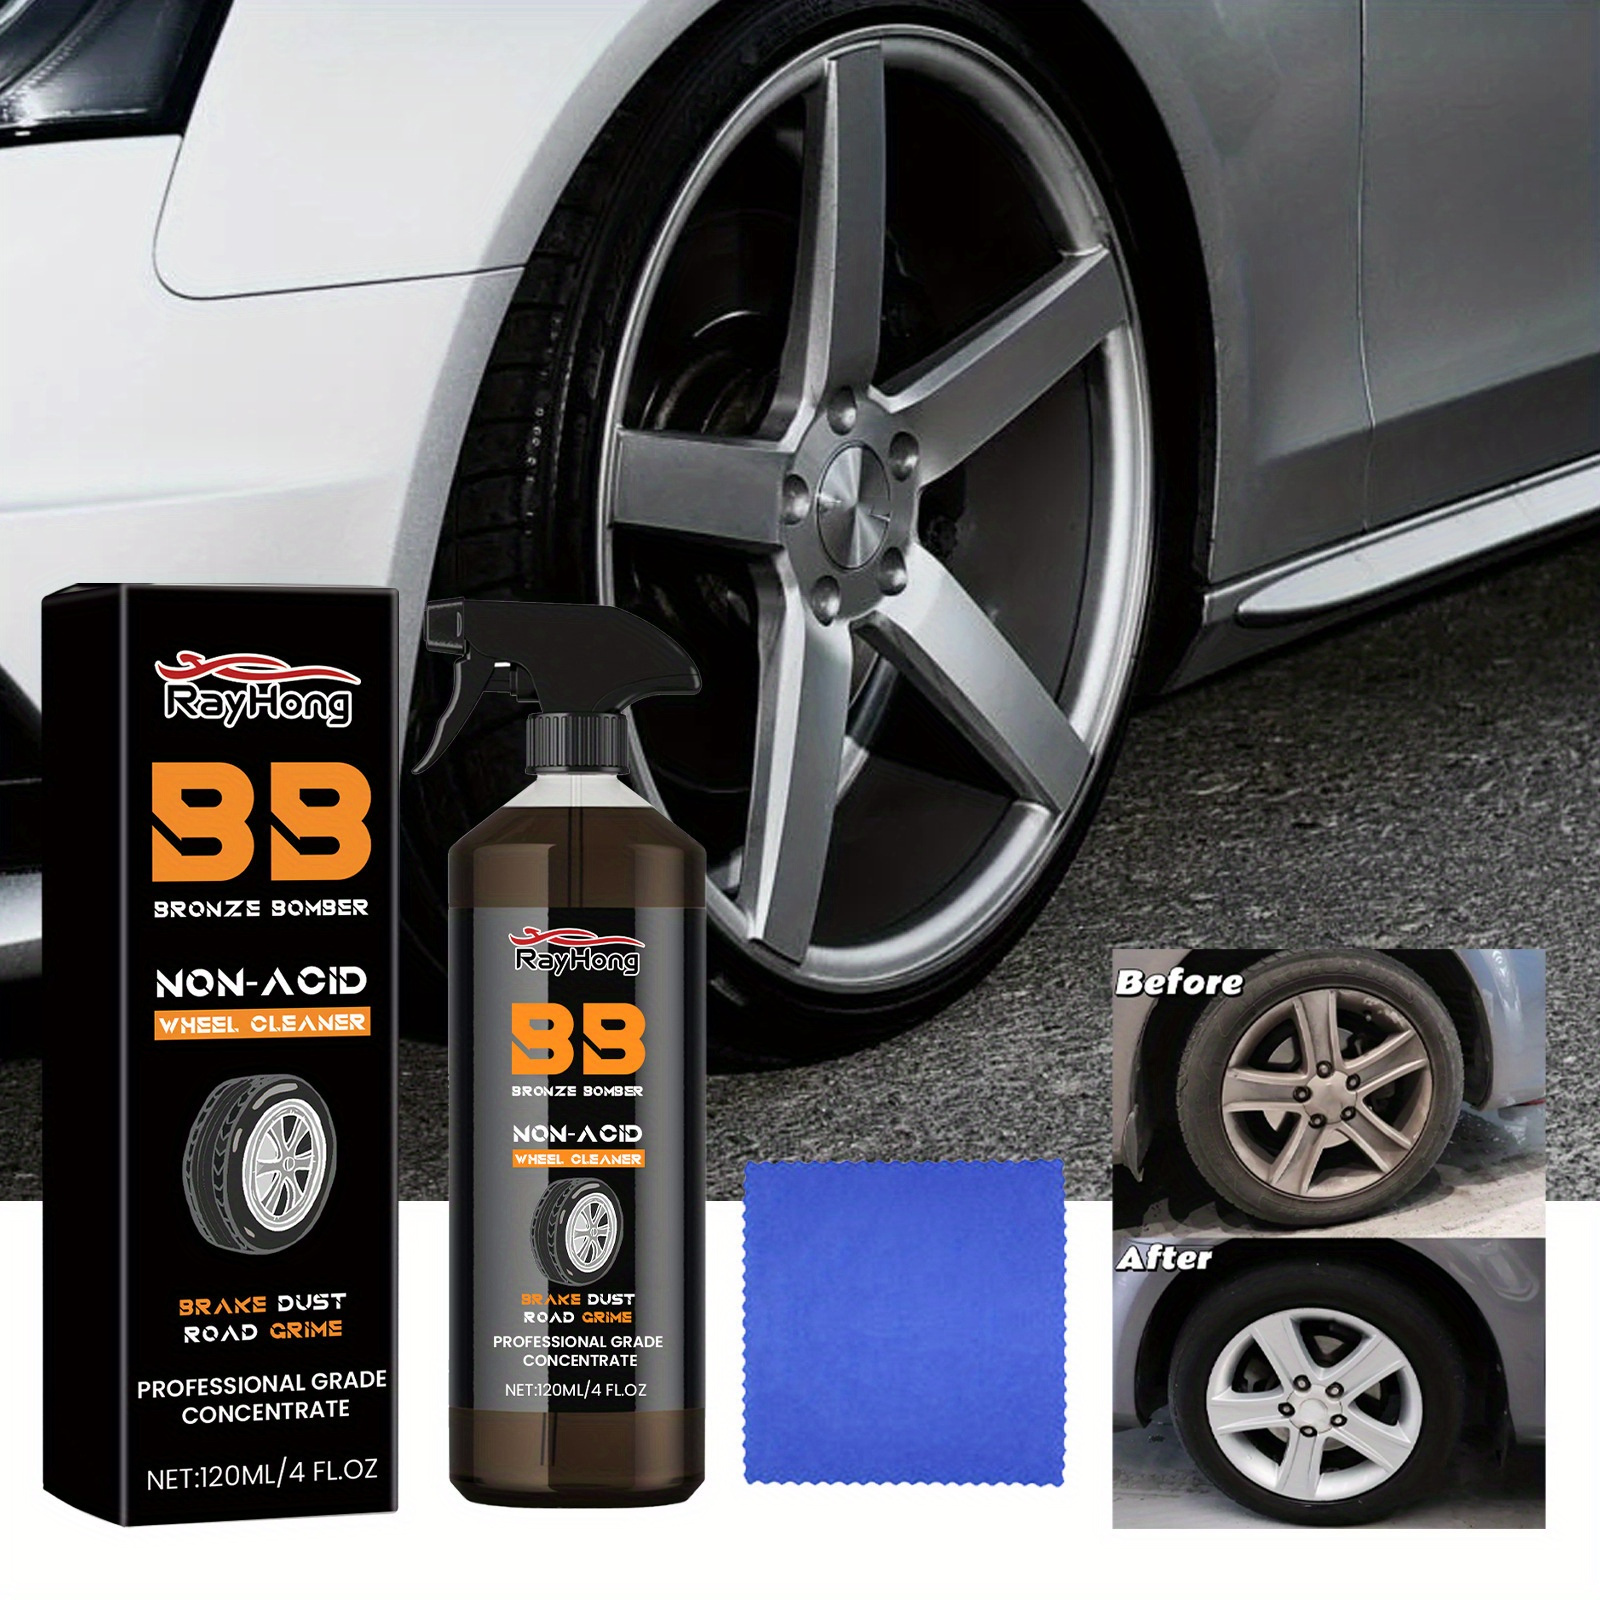 

Tire Cleaner All Wheel Cleaner Iron Remover Rust Dissolve Tire Cleaner For Cars, Trucks, Motorcycles